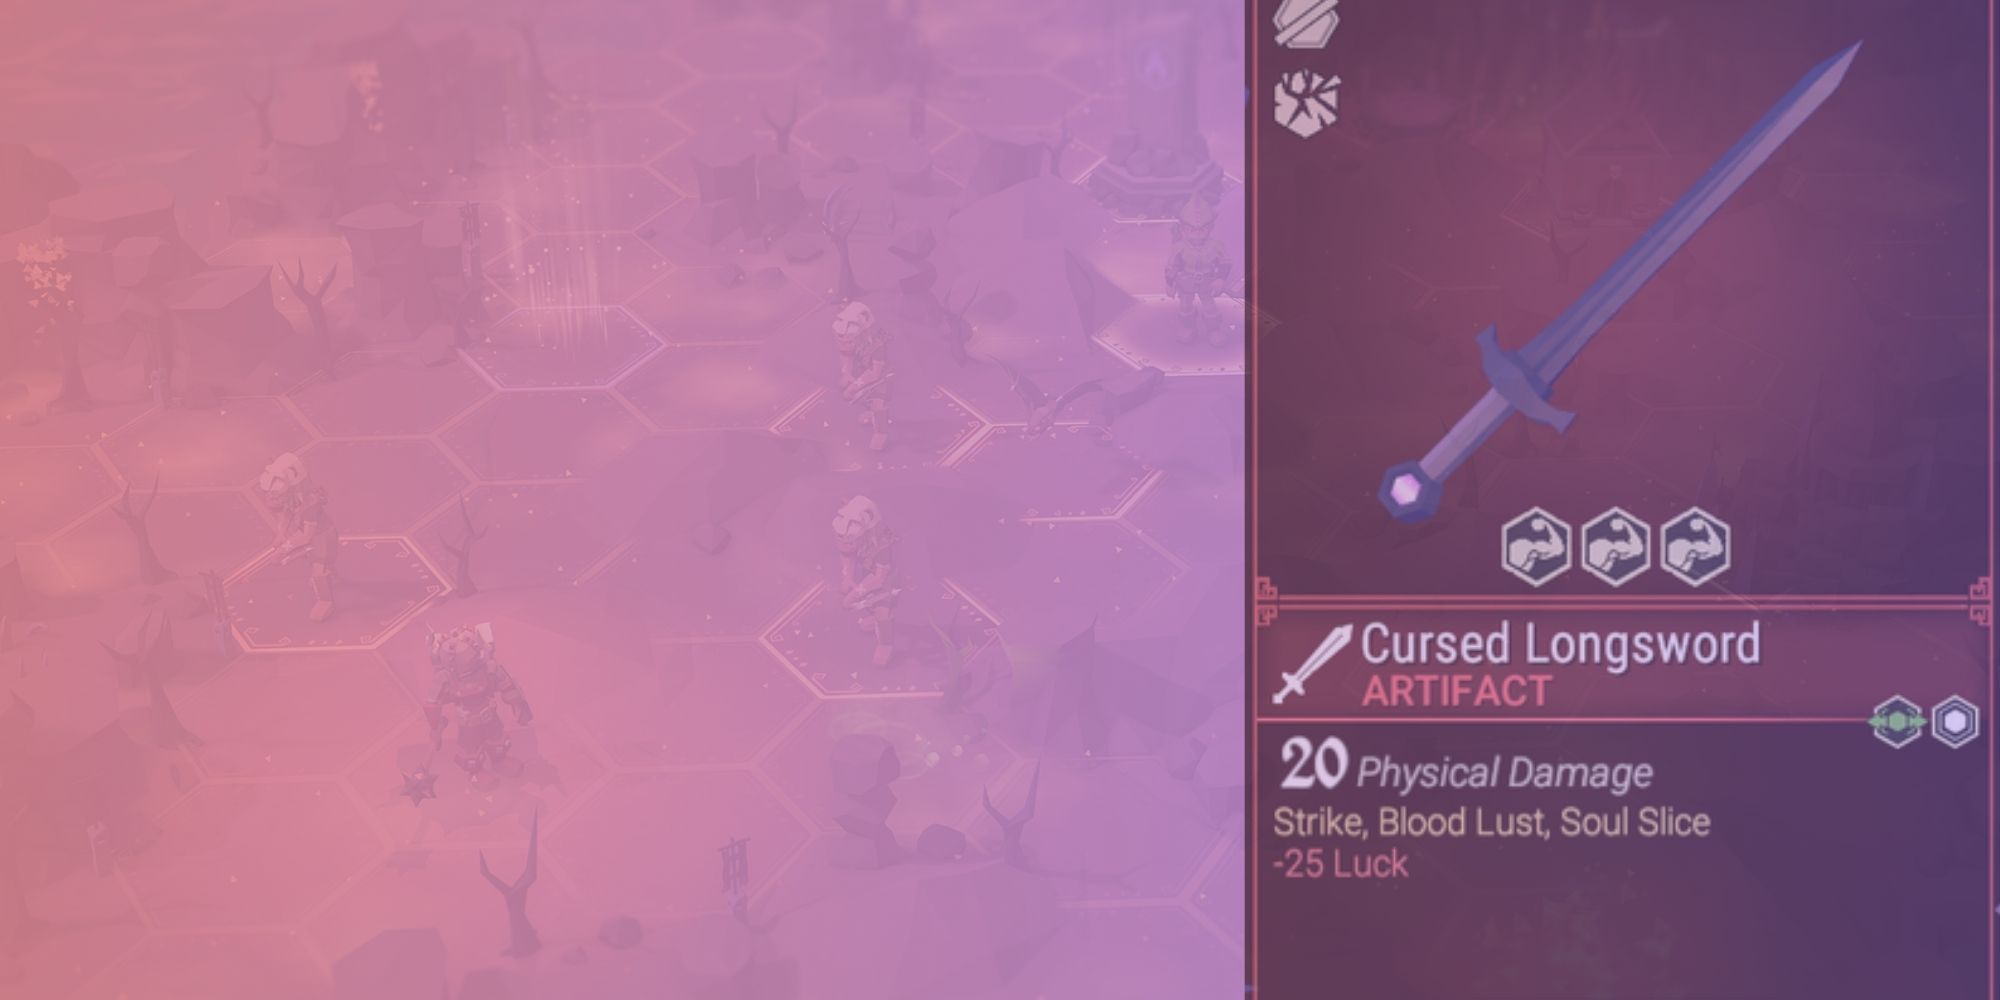 Cursed longsword stats over a pink and purple gradient background